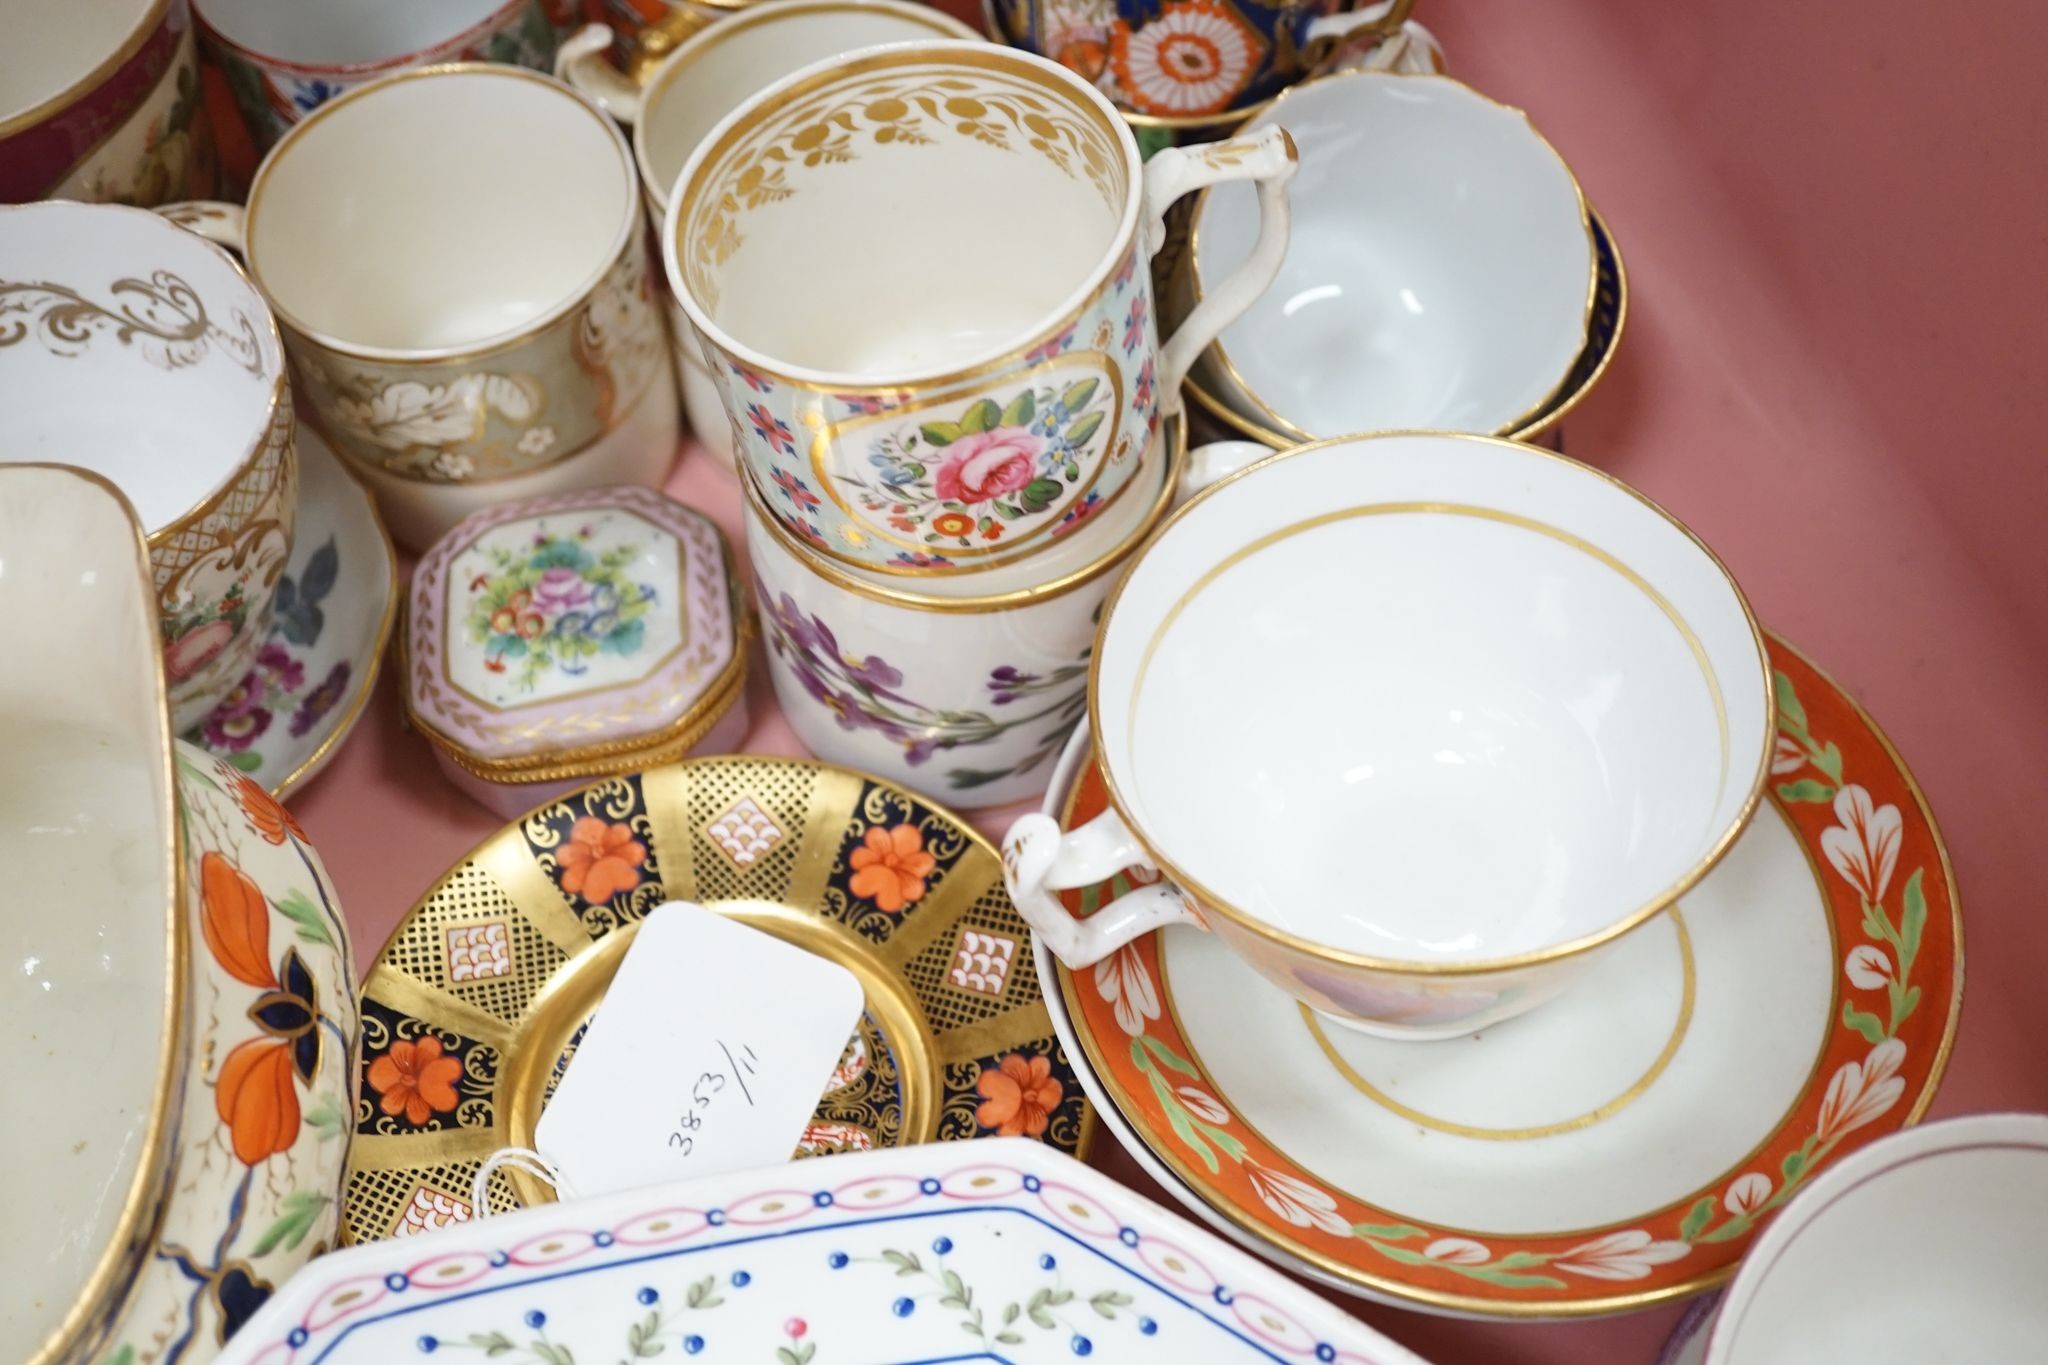 A collection of 19th century English porcelain tea and coffee cups, saucers and other tableware including Royal Crown Derby etc.